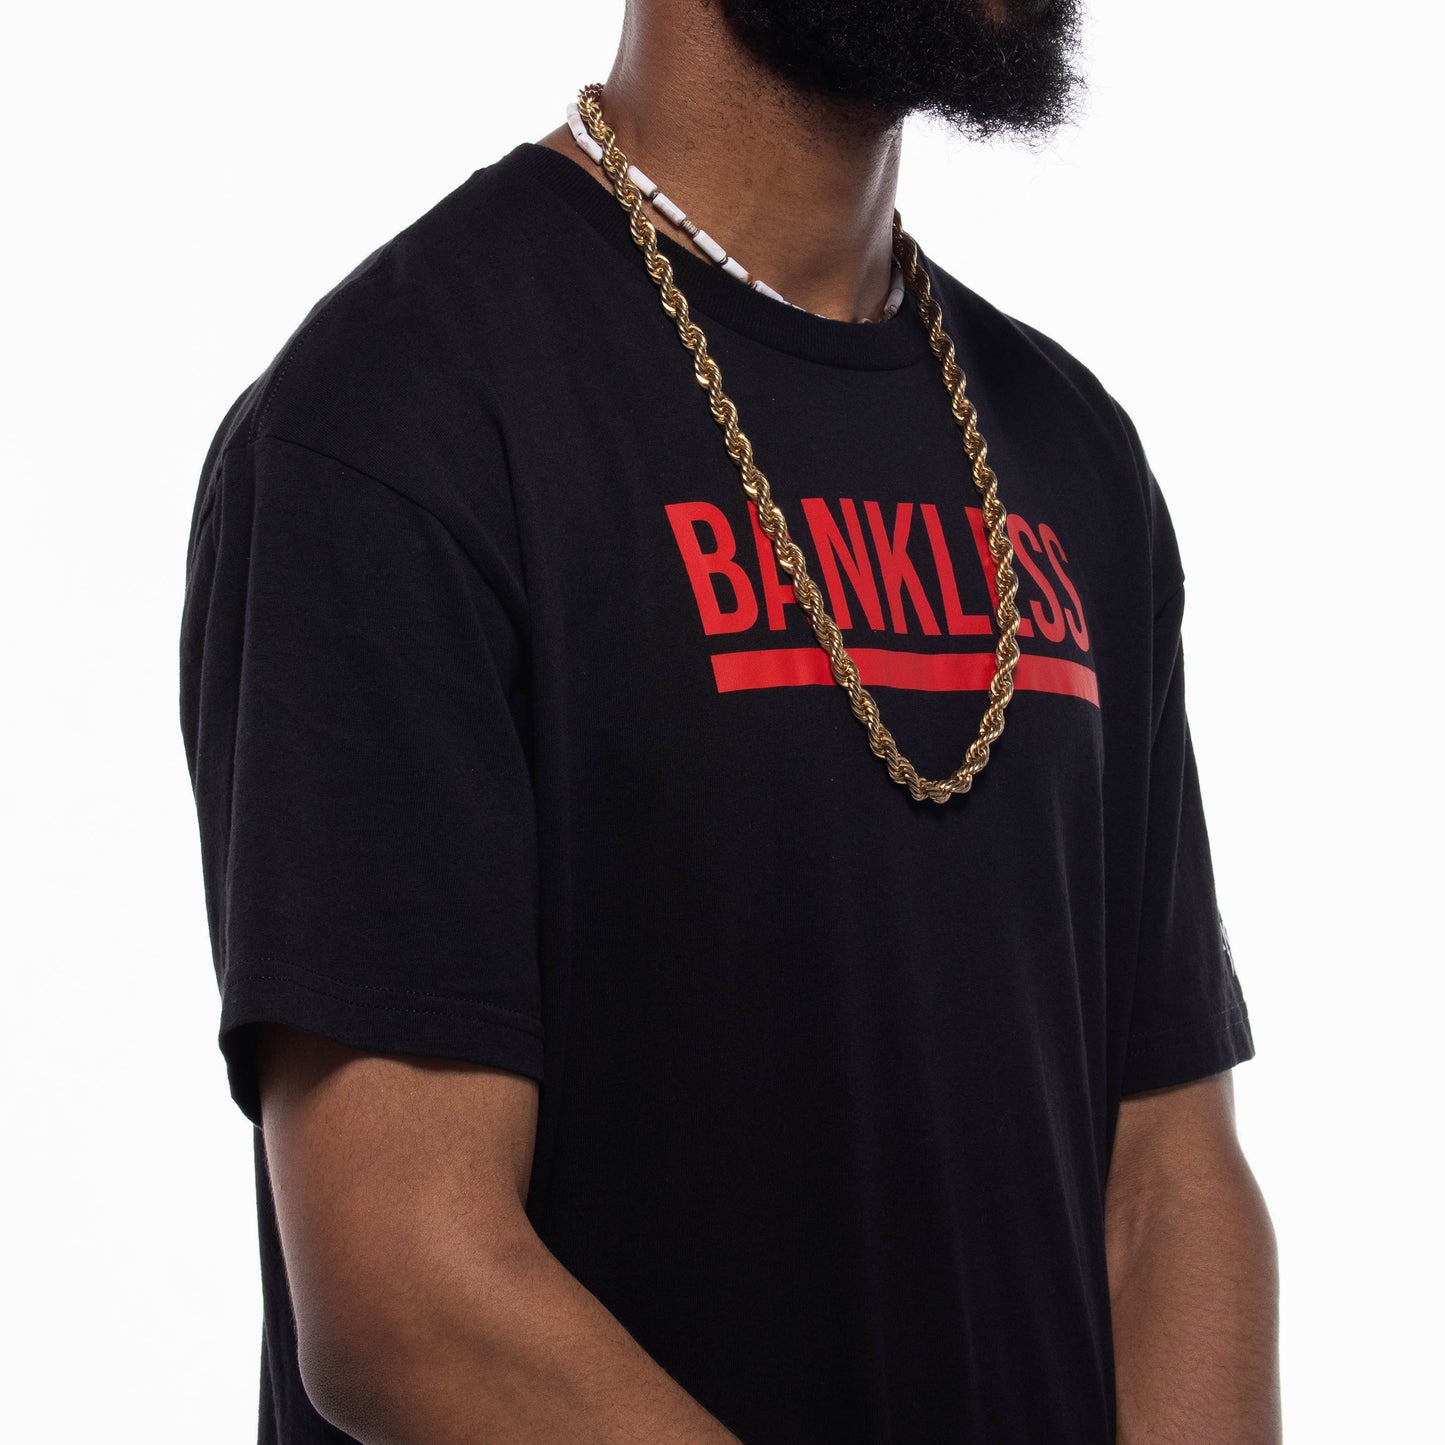 Bankless (T-Shirt)